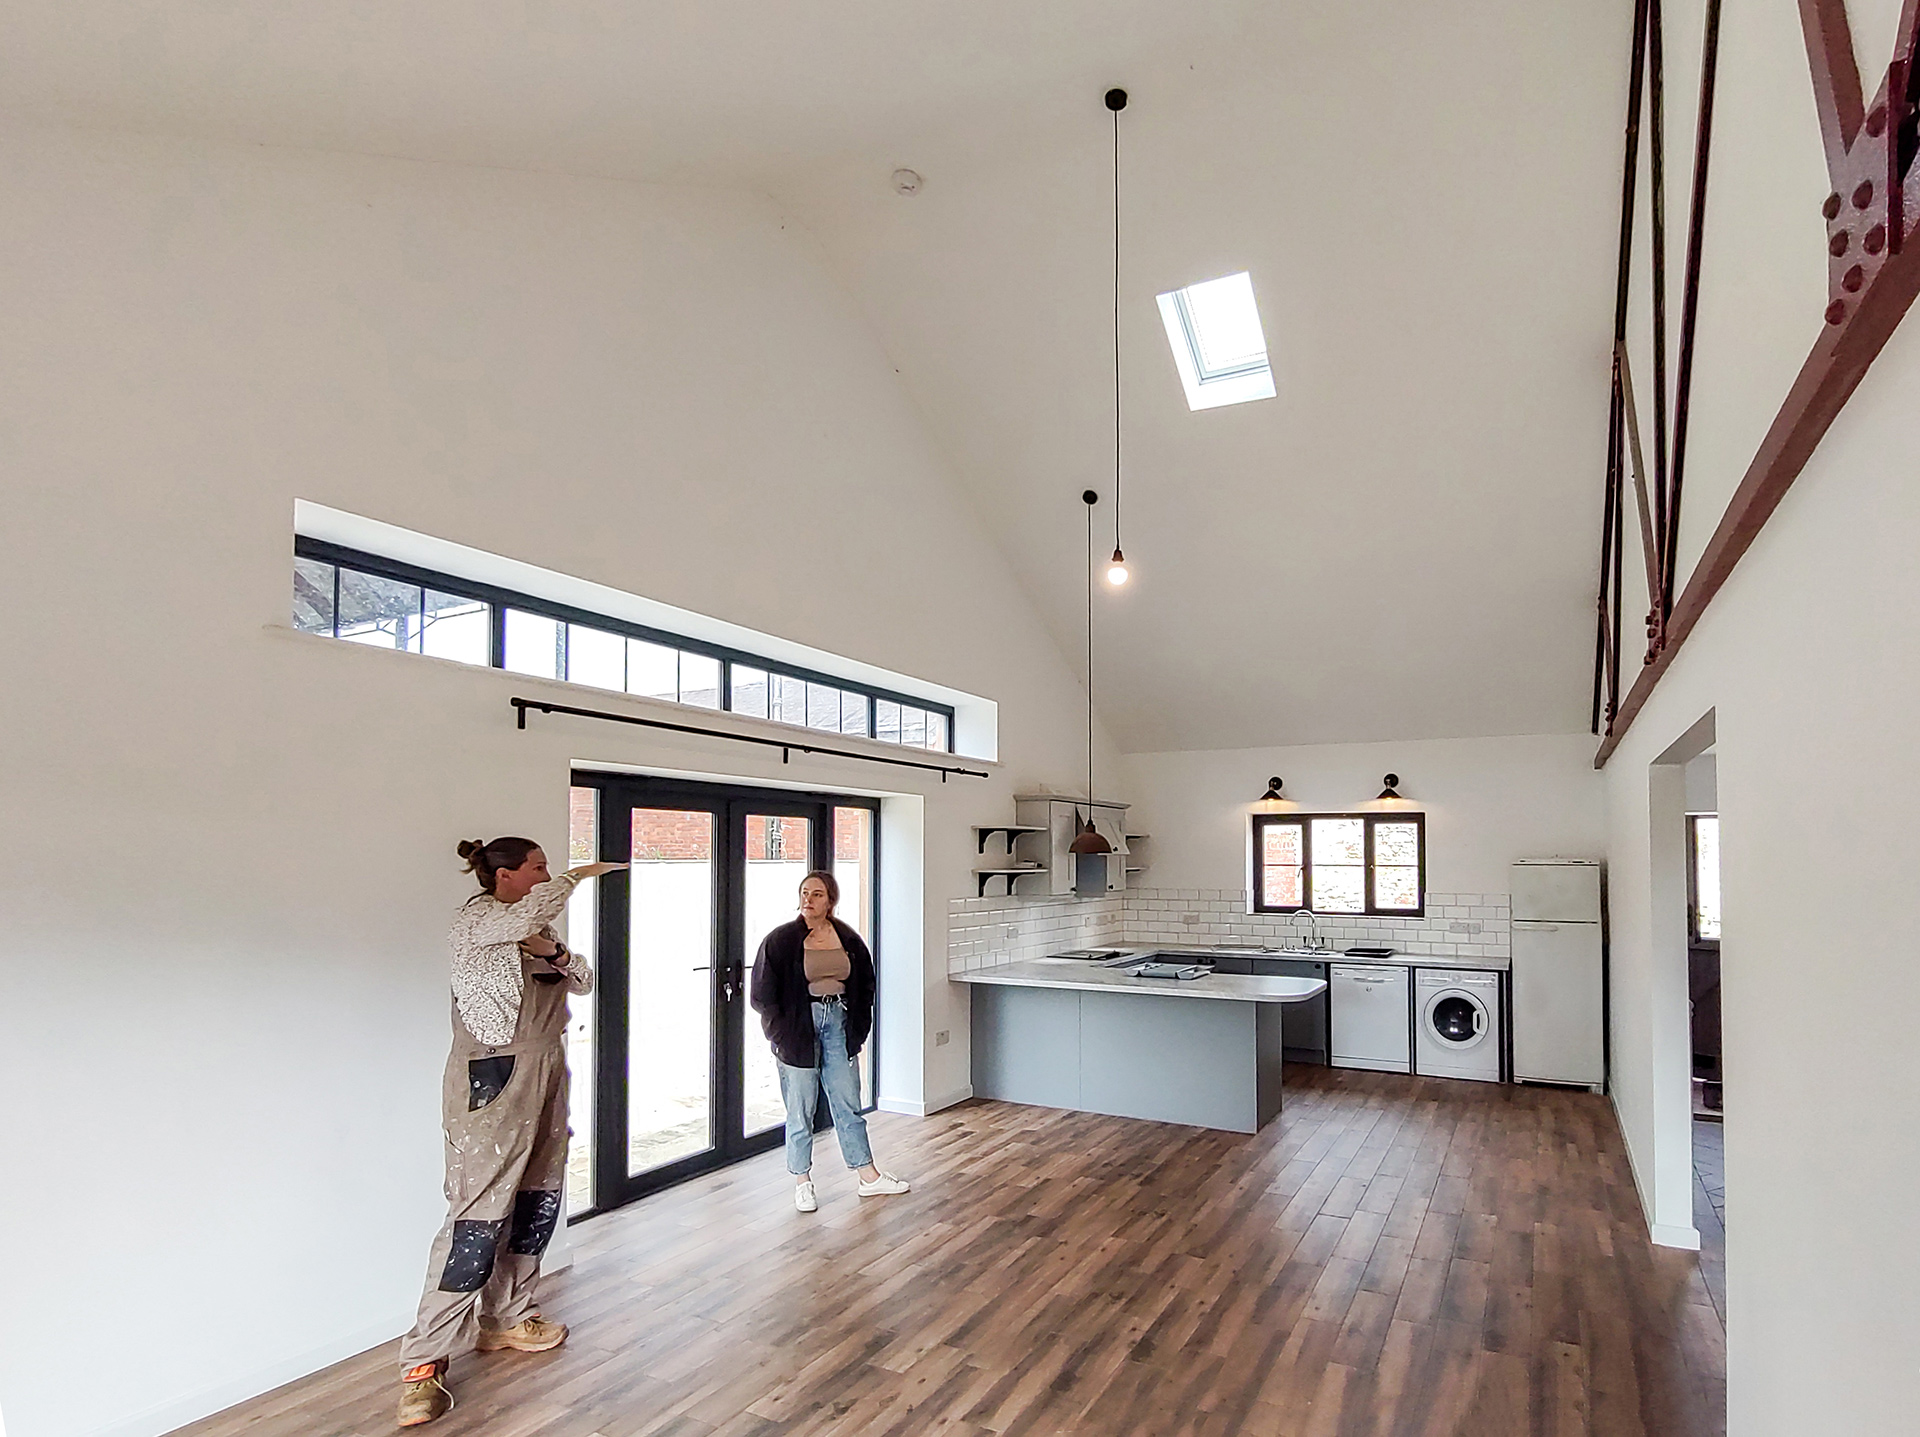 interior of kitchen with vaulted ceiling